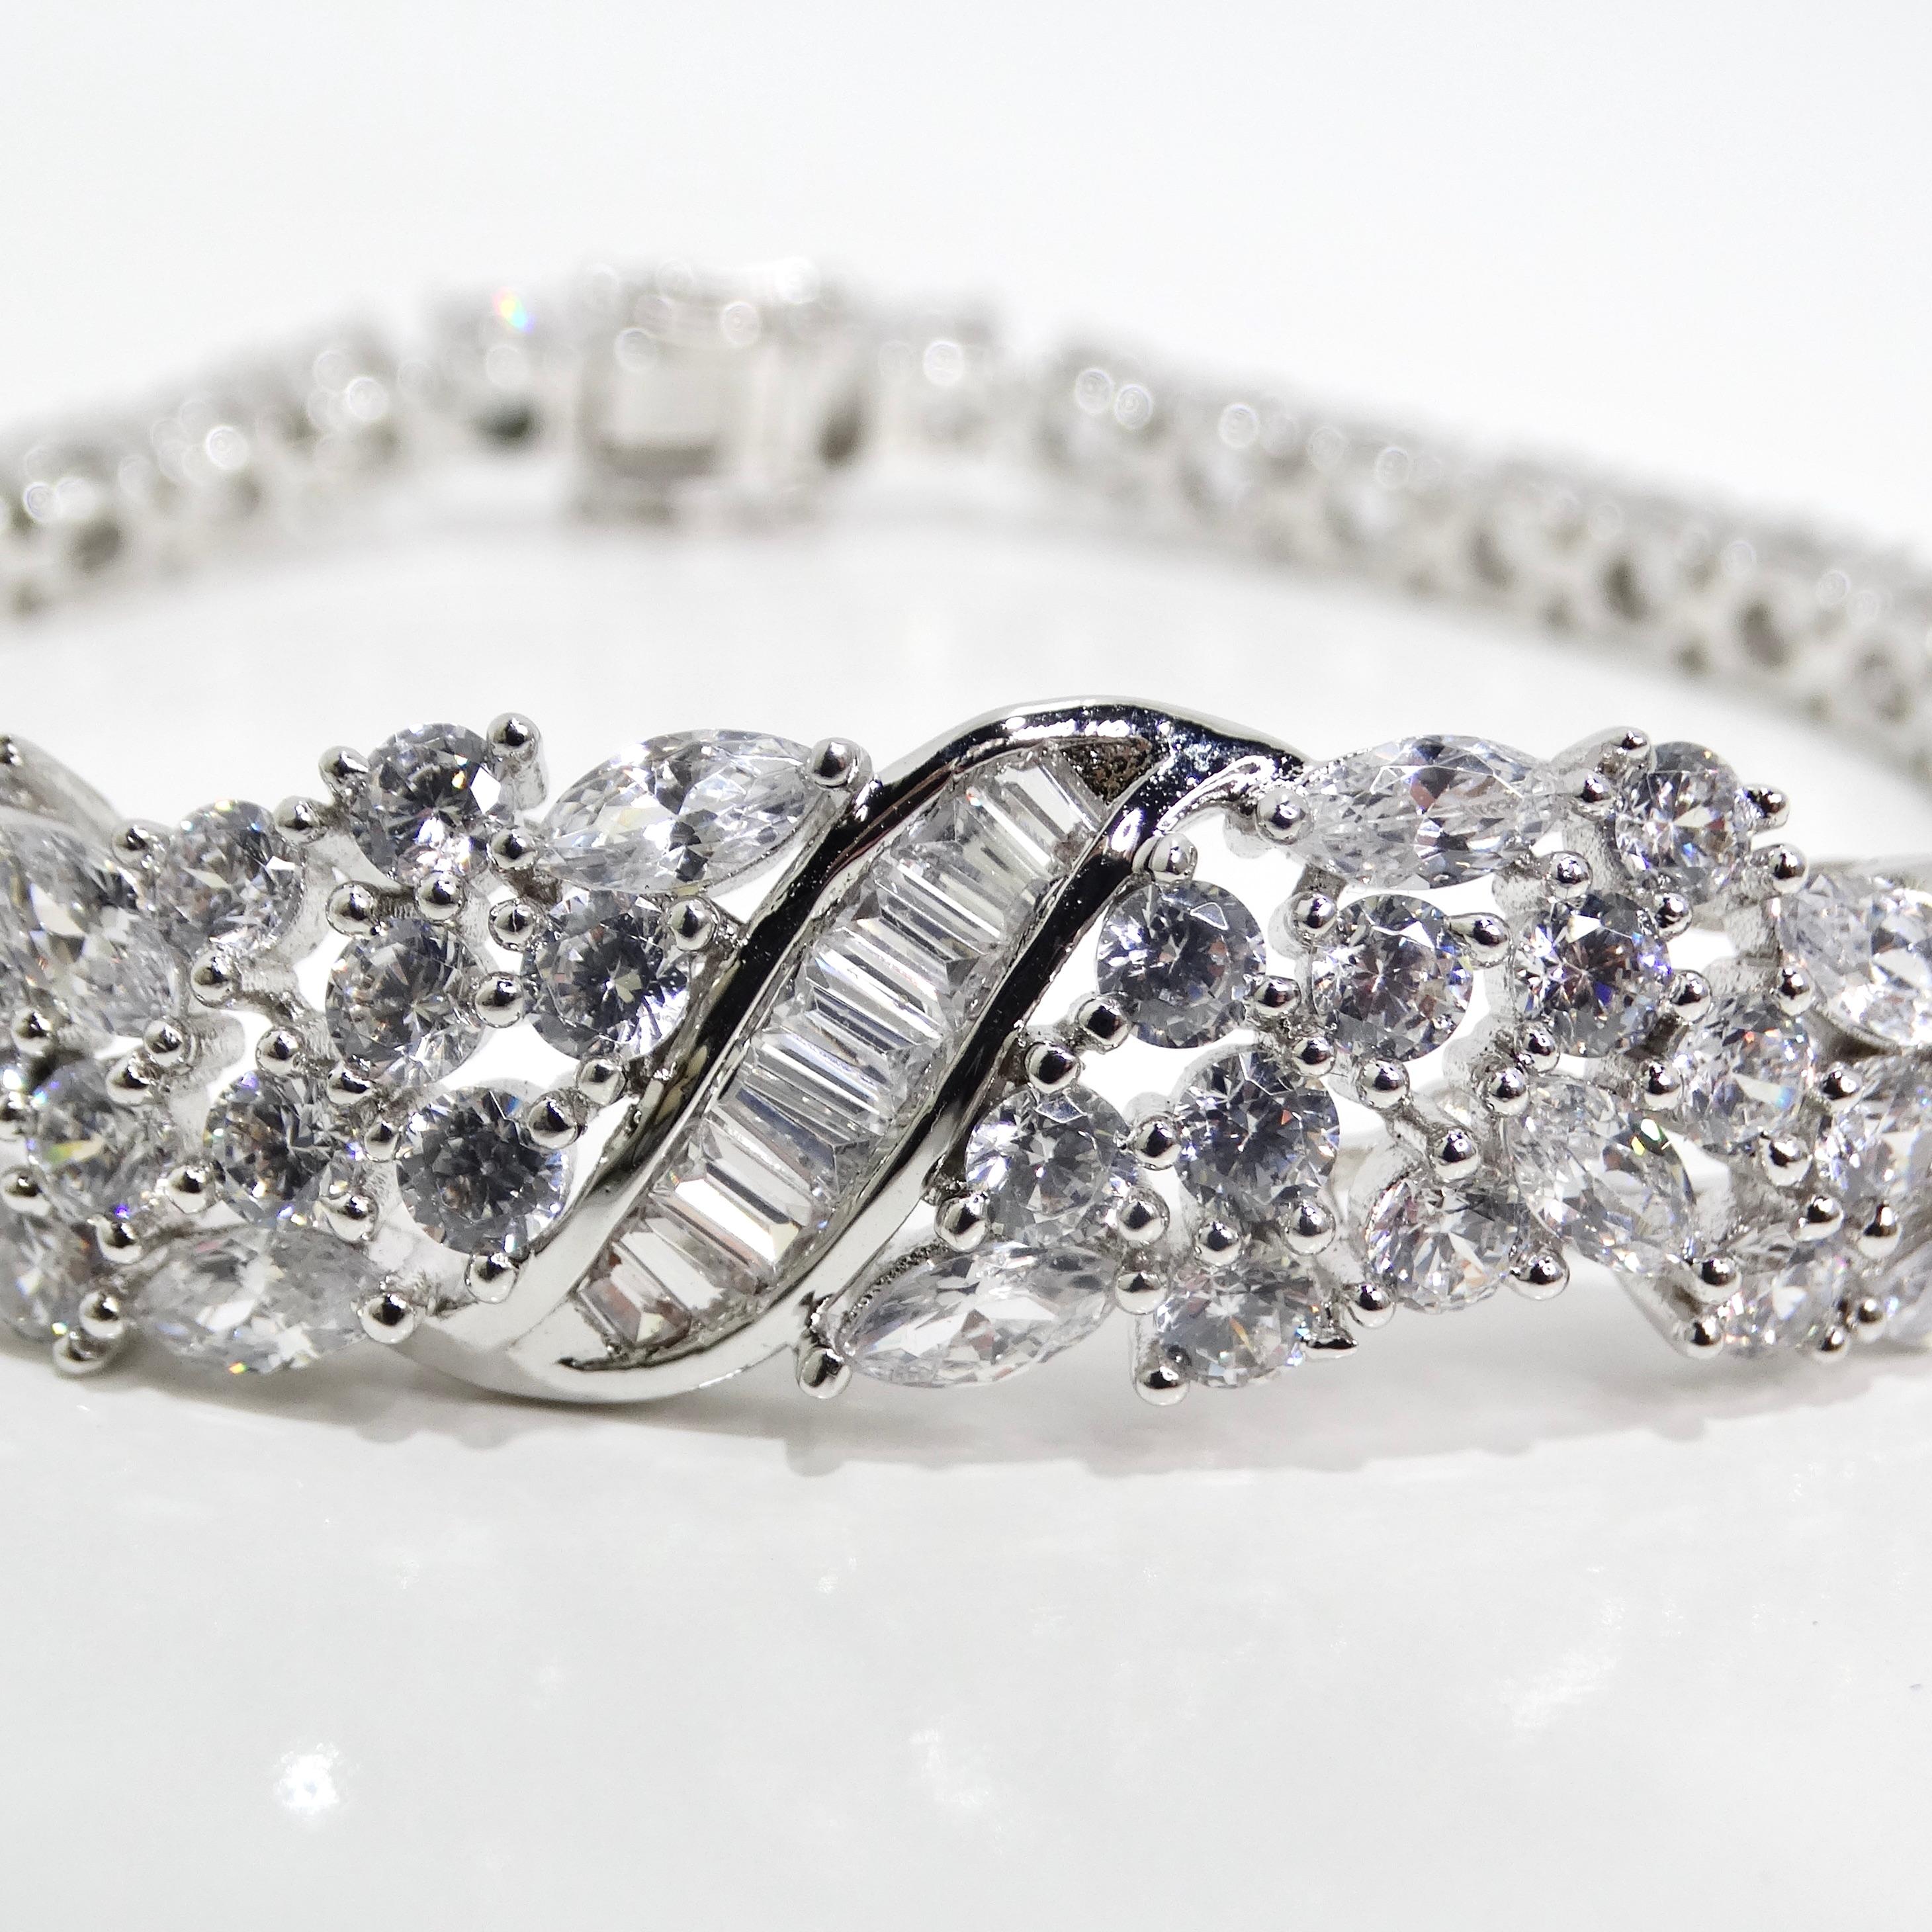 Step into the opulent world of the 1990s with the Art Deco Silver Rhinestone Bracelet, a captivating accessory that exudes the glamour and sophistication of the iconic Art Deco era. This incredible bracelet showcases a breathtaking design, featuring